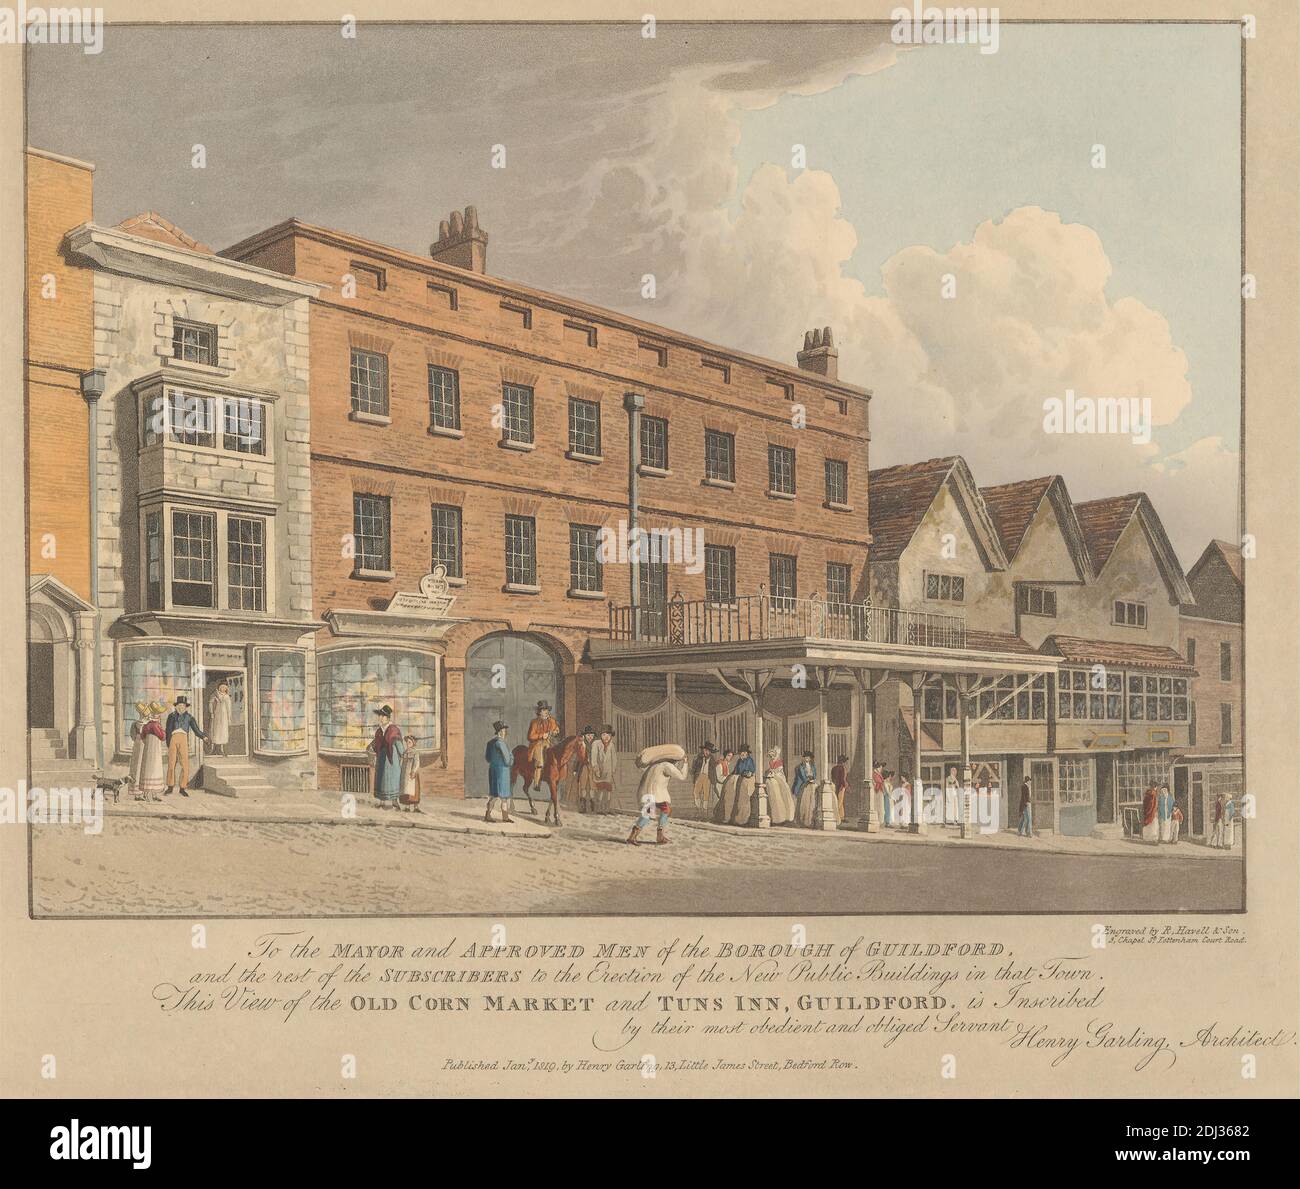 View of the Old Corn Market and Tuns Inn, Guildford, Print made by Robert Havell & Son, 1769–1832, British, after Henry Garling, 1789–1870, British, Published by Henry Garling, 1789–1870, British, 1819, Aquatint with etching, hand-colored on thick, moderately textured, beige wove paper, Sheet: 11 11/16 x 15 1/8 inches (29.7 x 38.4 cm), Plate: 9 1/8 x 11 1/16 inches (23.1 x 28.1 cm), and Image: 6 5/16 x 8 5/8 inches (16.1 x 21.9 cm), architect, architectural subject, architecture, bonnets, buildings, businesses, children, city, dog (animal), genre subject, horse (animal), markets, men, shopping Stock Photo